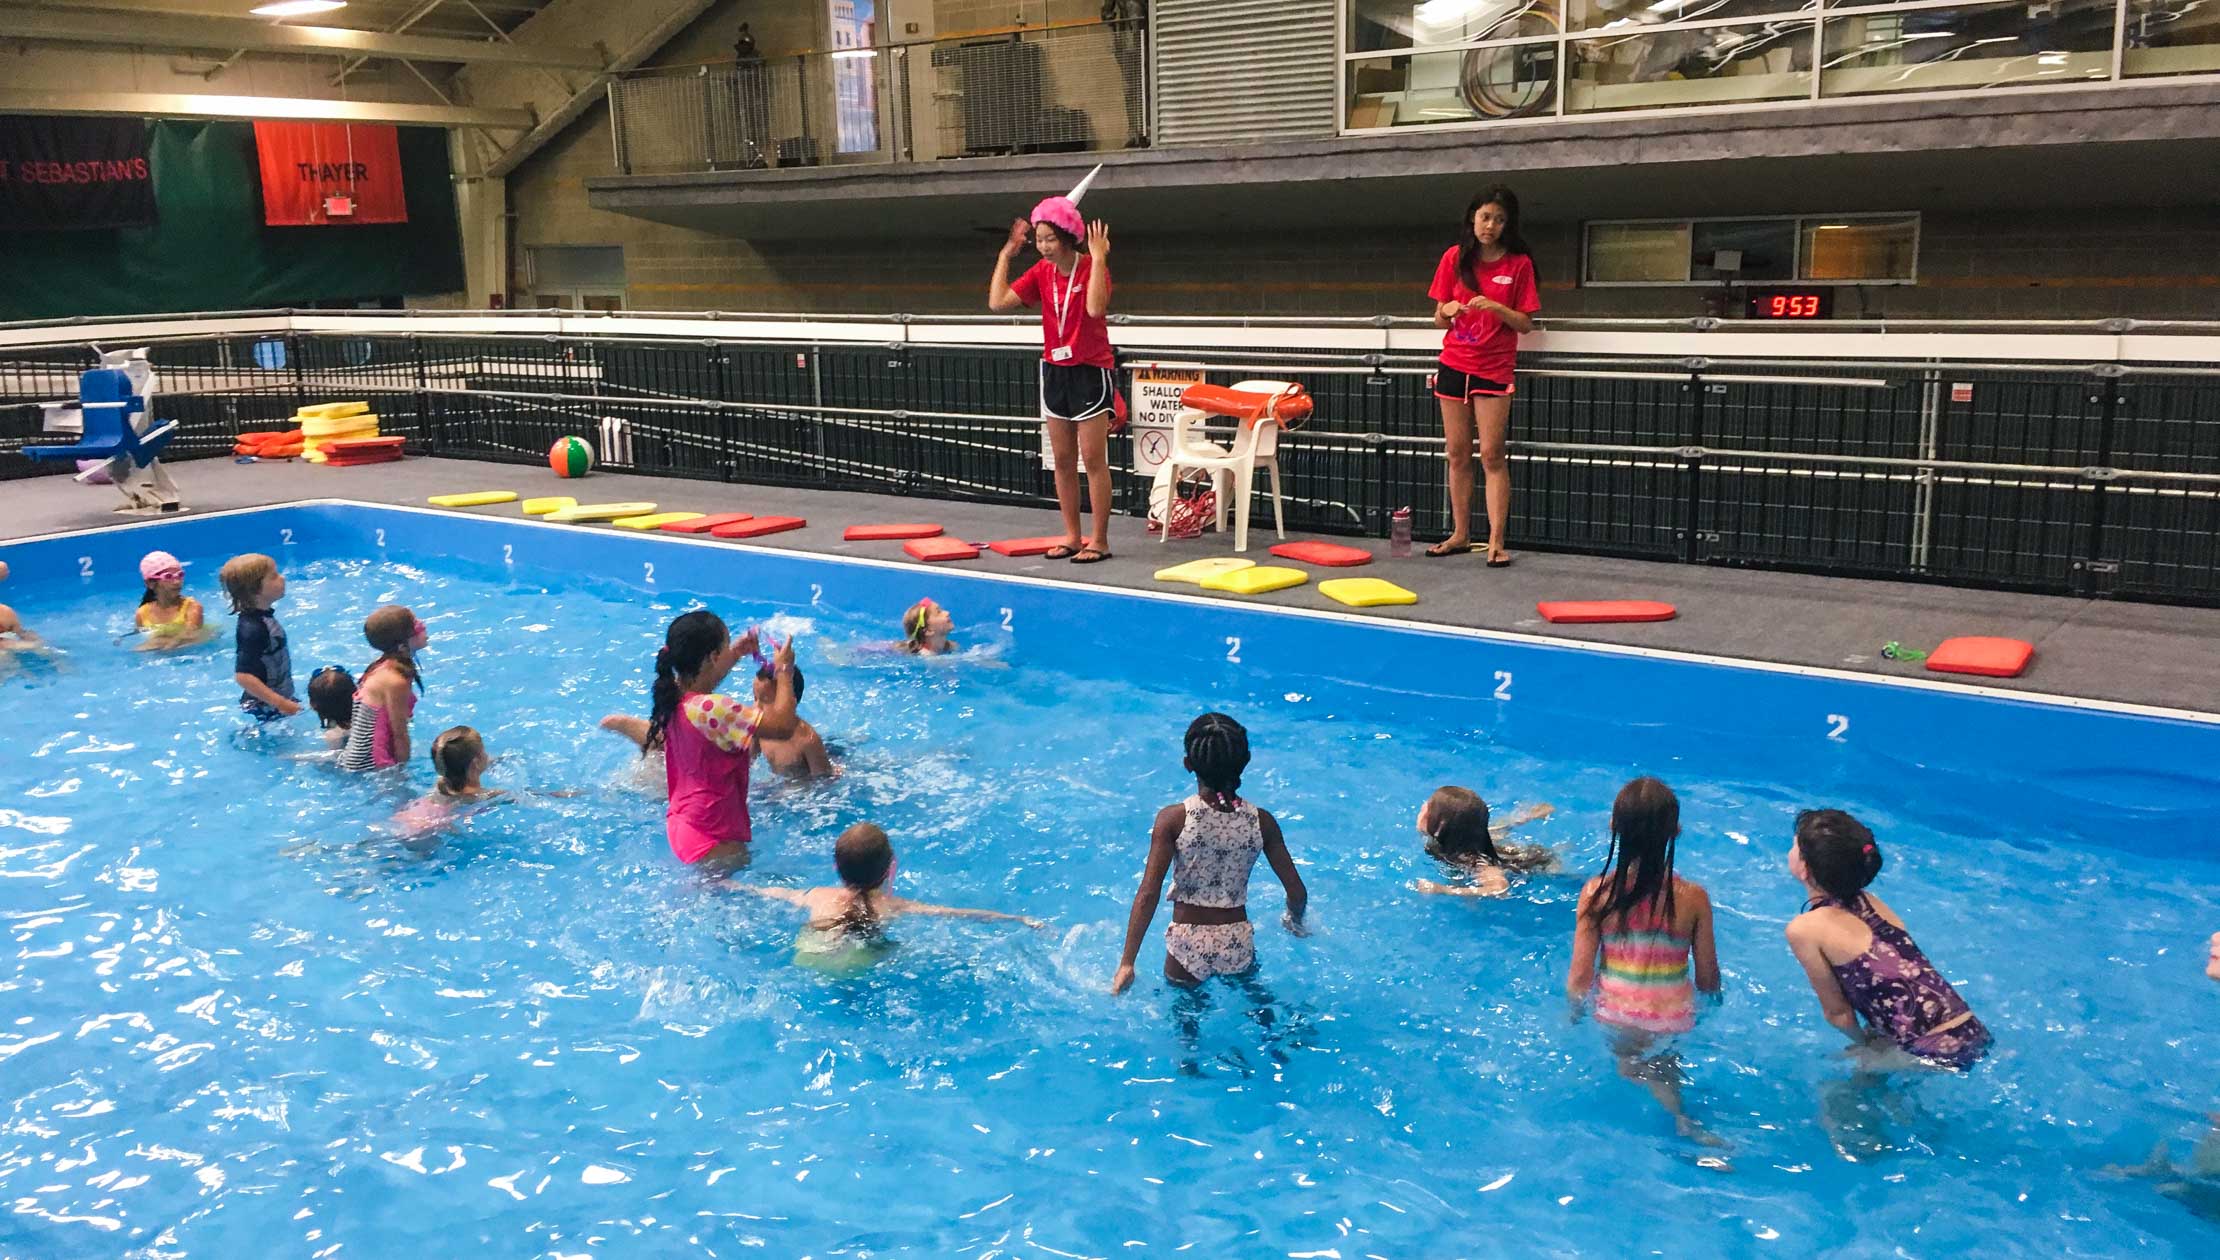 Lifeguards helping campers with swimming lessons